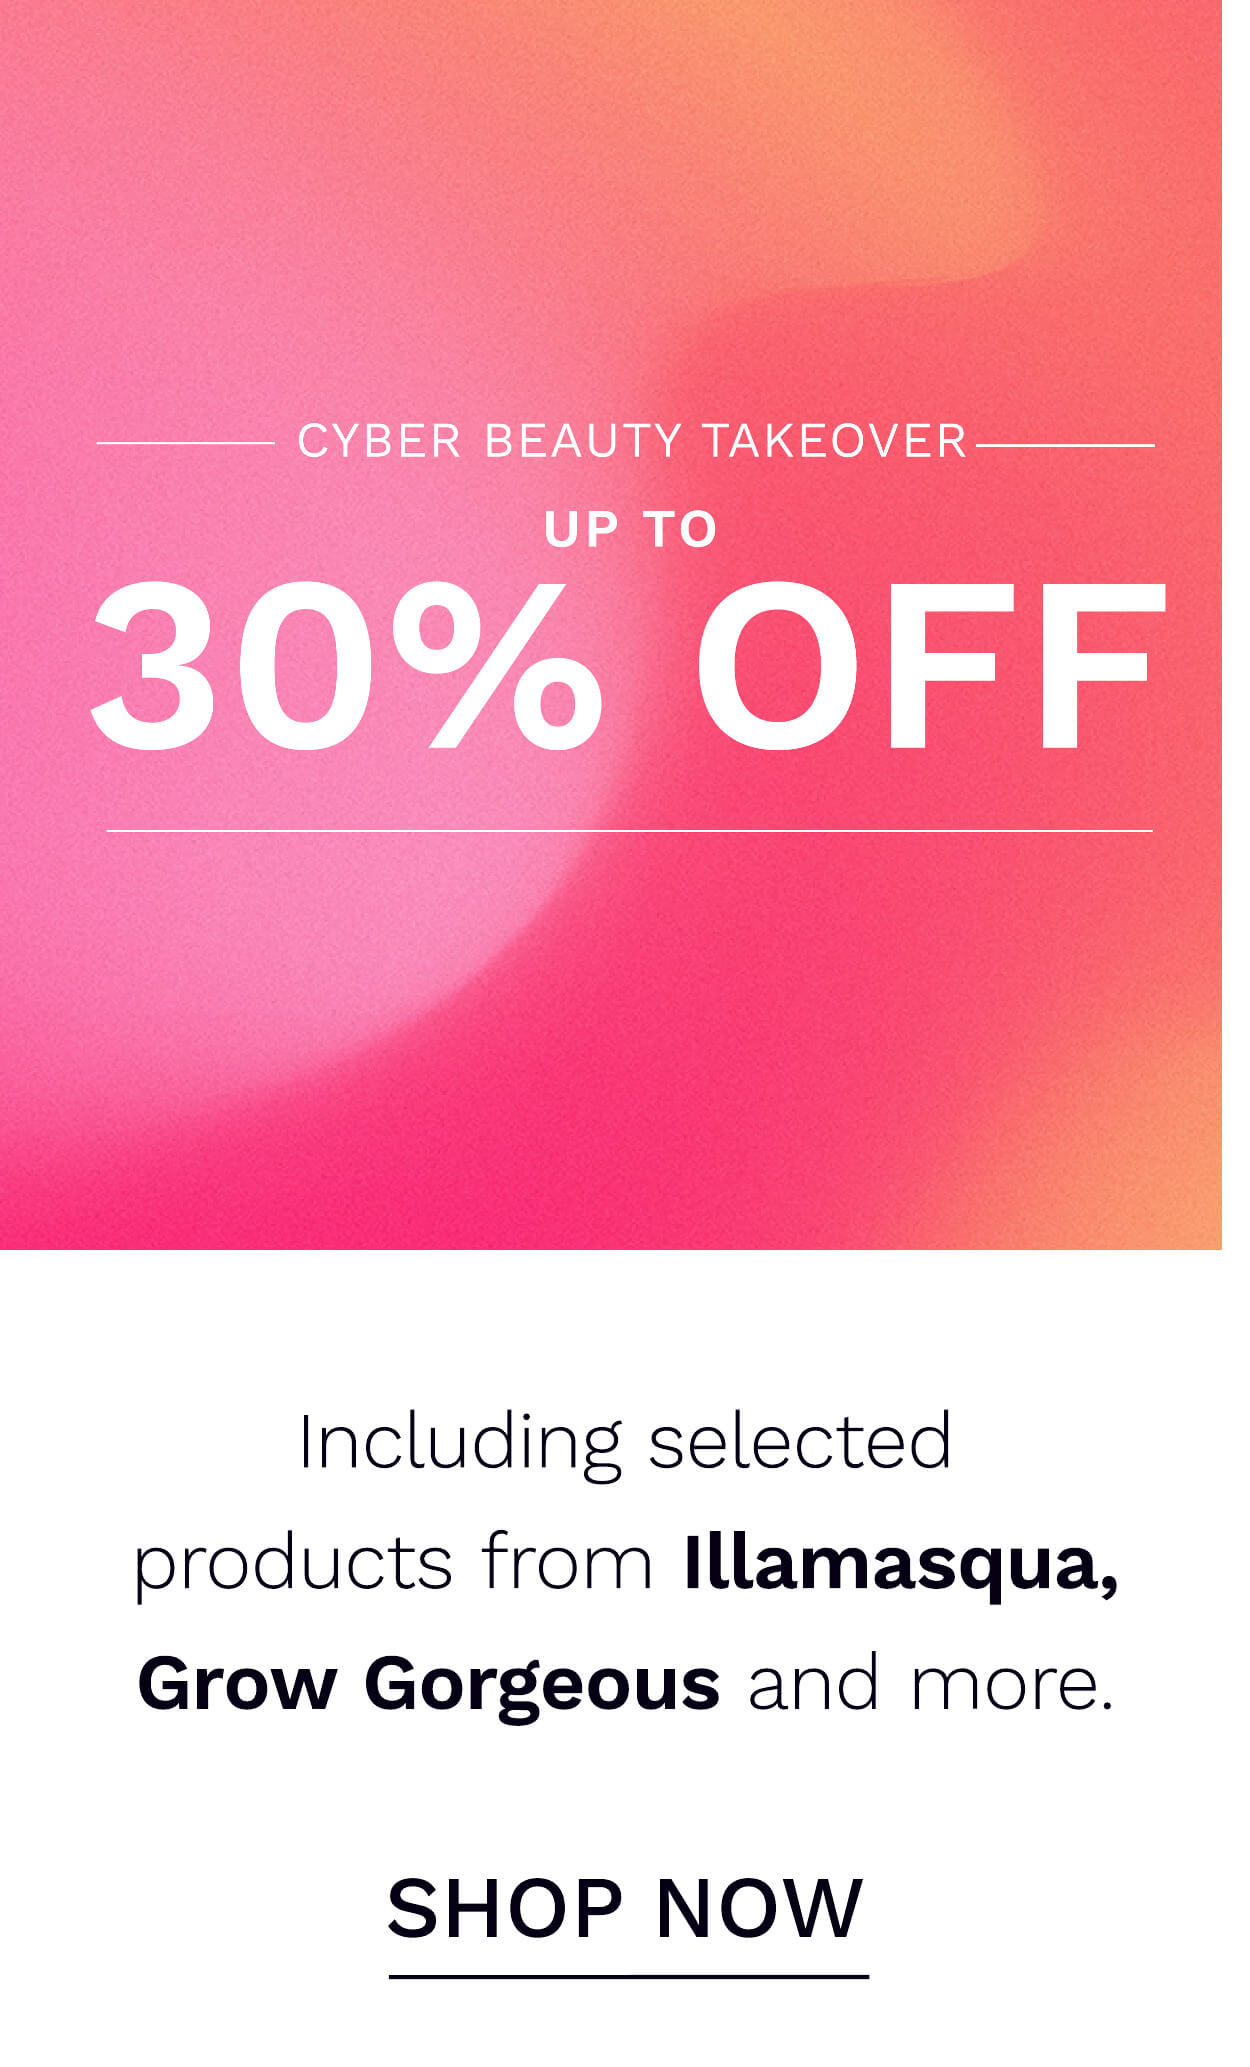 UP TO 30 PERCENT OFF SELECTED PRODUCTS